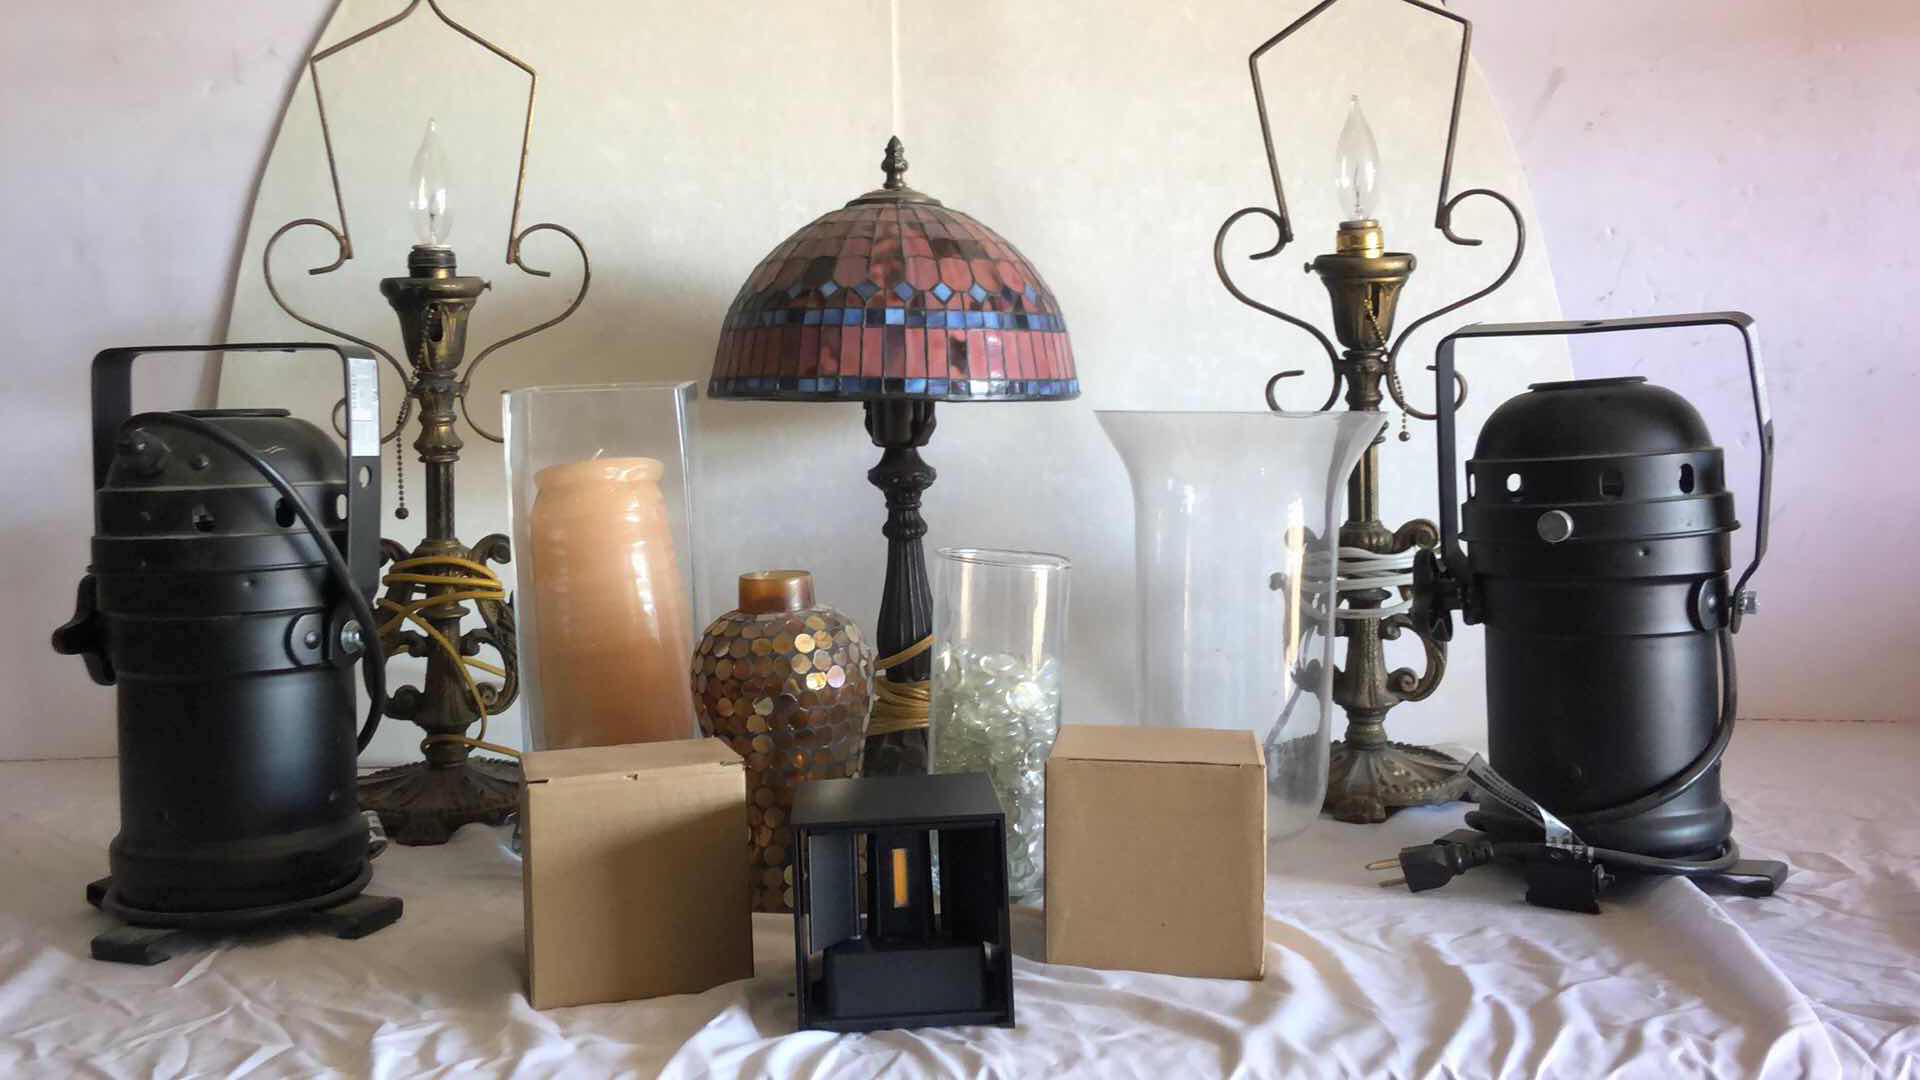 Photo 1 of ASSORTED HOME LIGHTING AND DECOR BUNDLE 3 LAMPS, 2 AMERICAN DJ LIGHTS, WALL BRACKET SCONCES, ETC